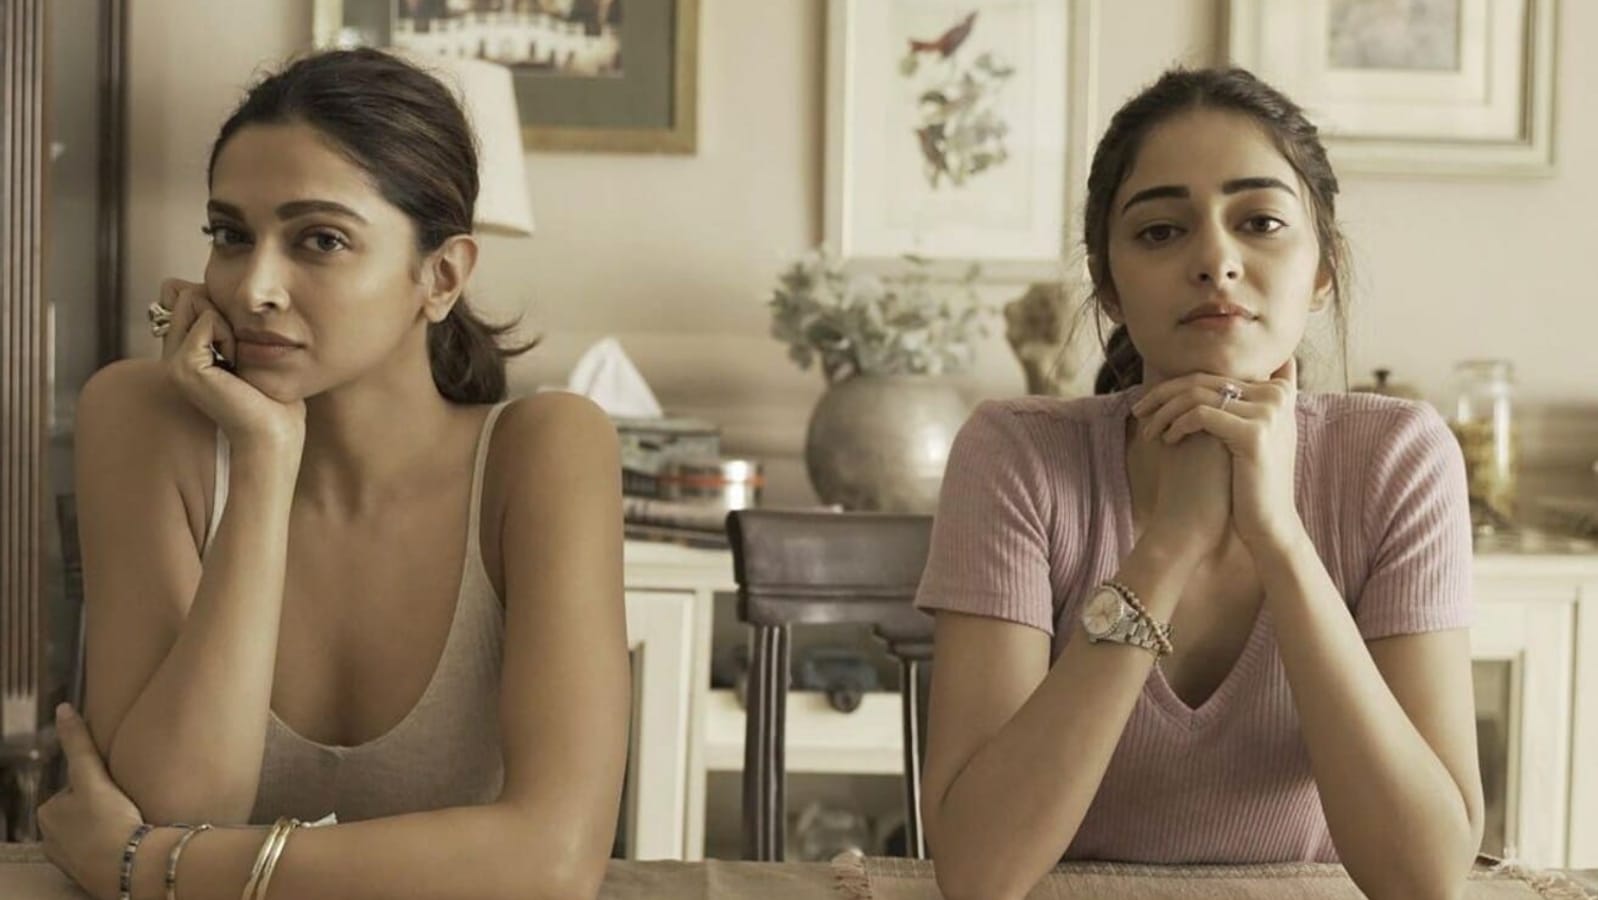 Blushing Ananya Panday says ‘I can’t say who’ as Deepika Padukone grills her about dating life. Watch